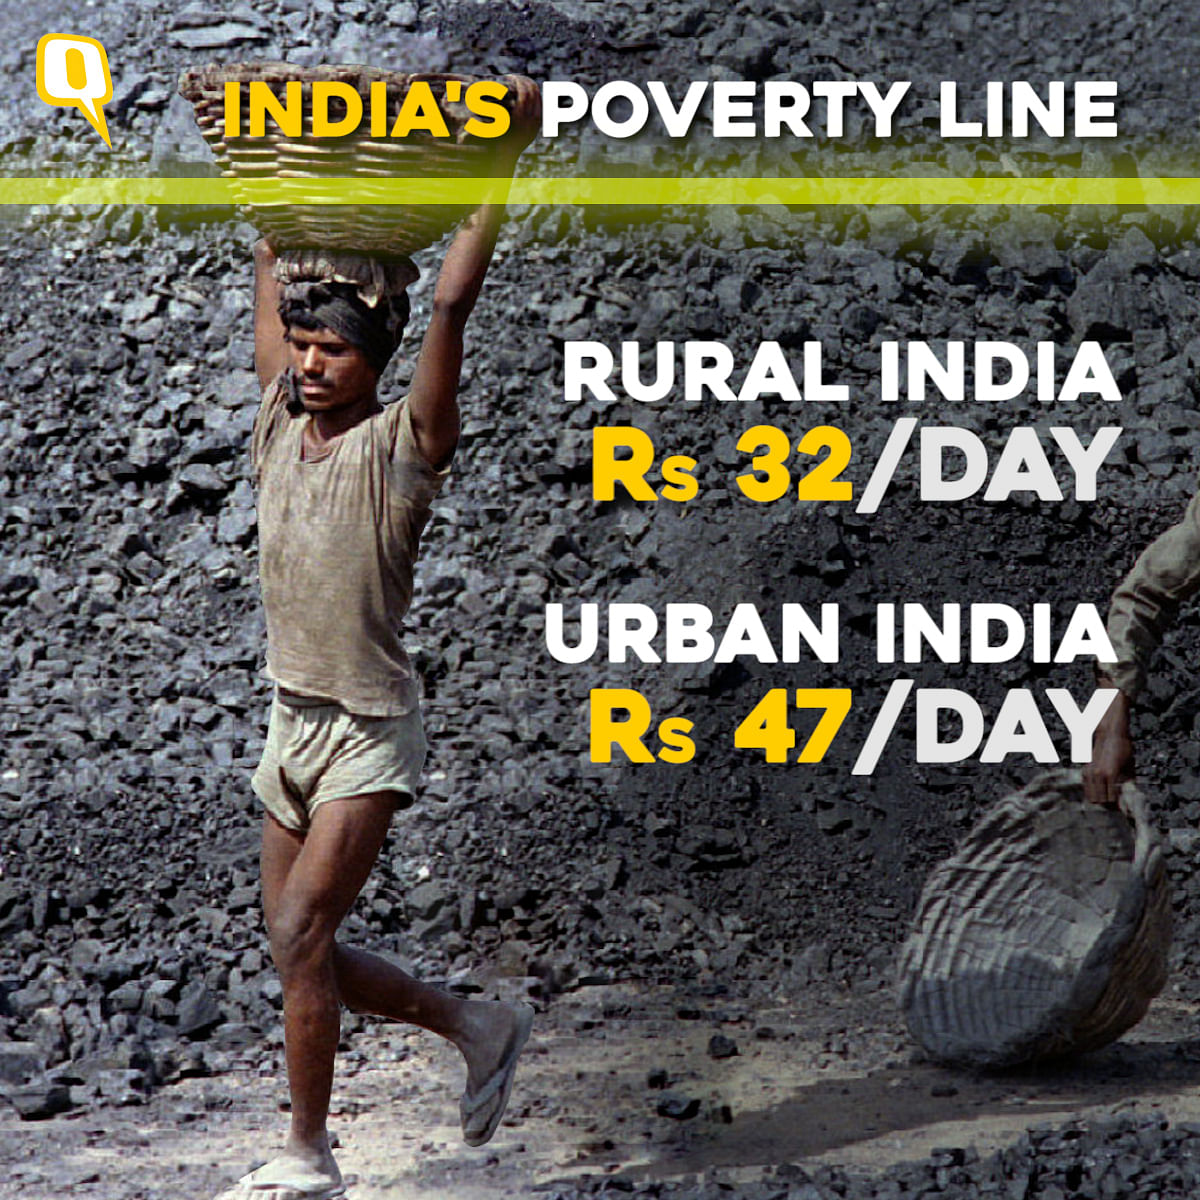 Recent rankings claim India is the seventh wealthiest country, but the poverty figures still remain disturbing.